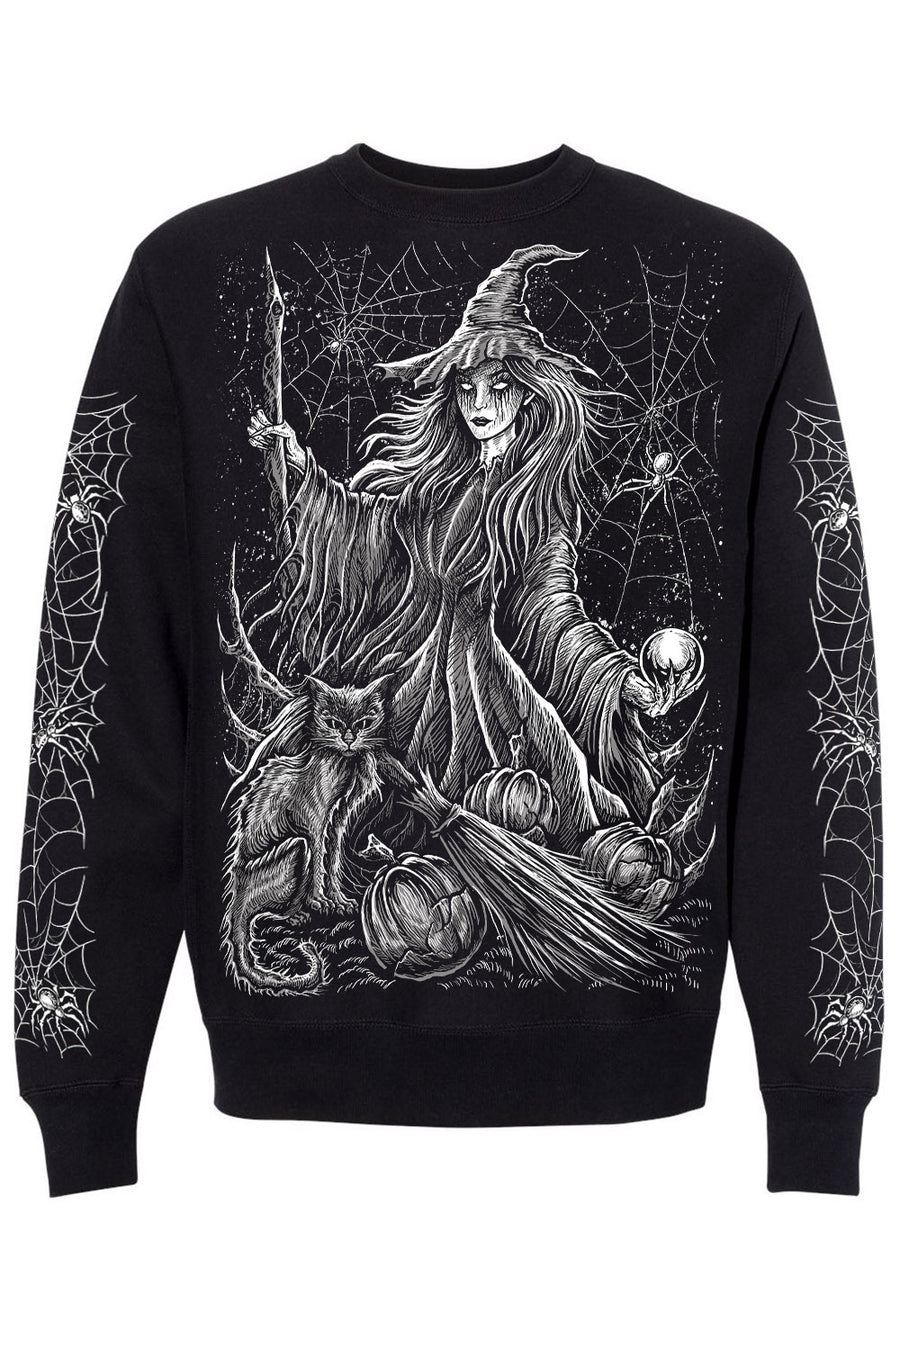 witch and black cat sweater